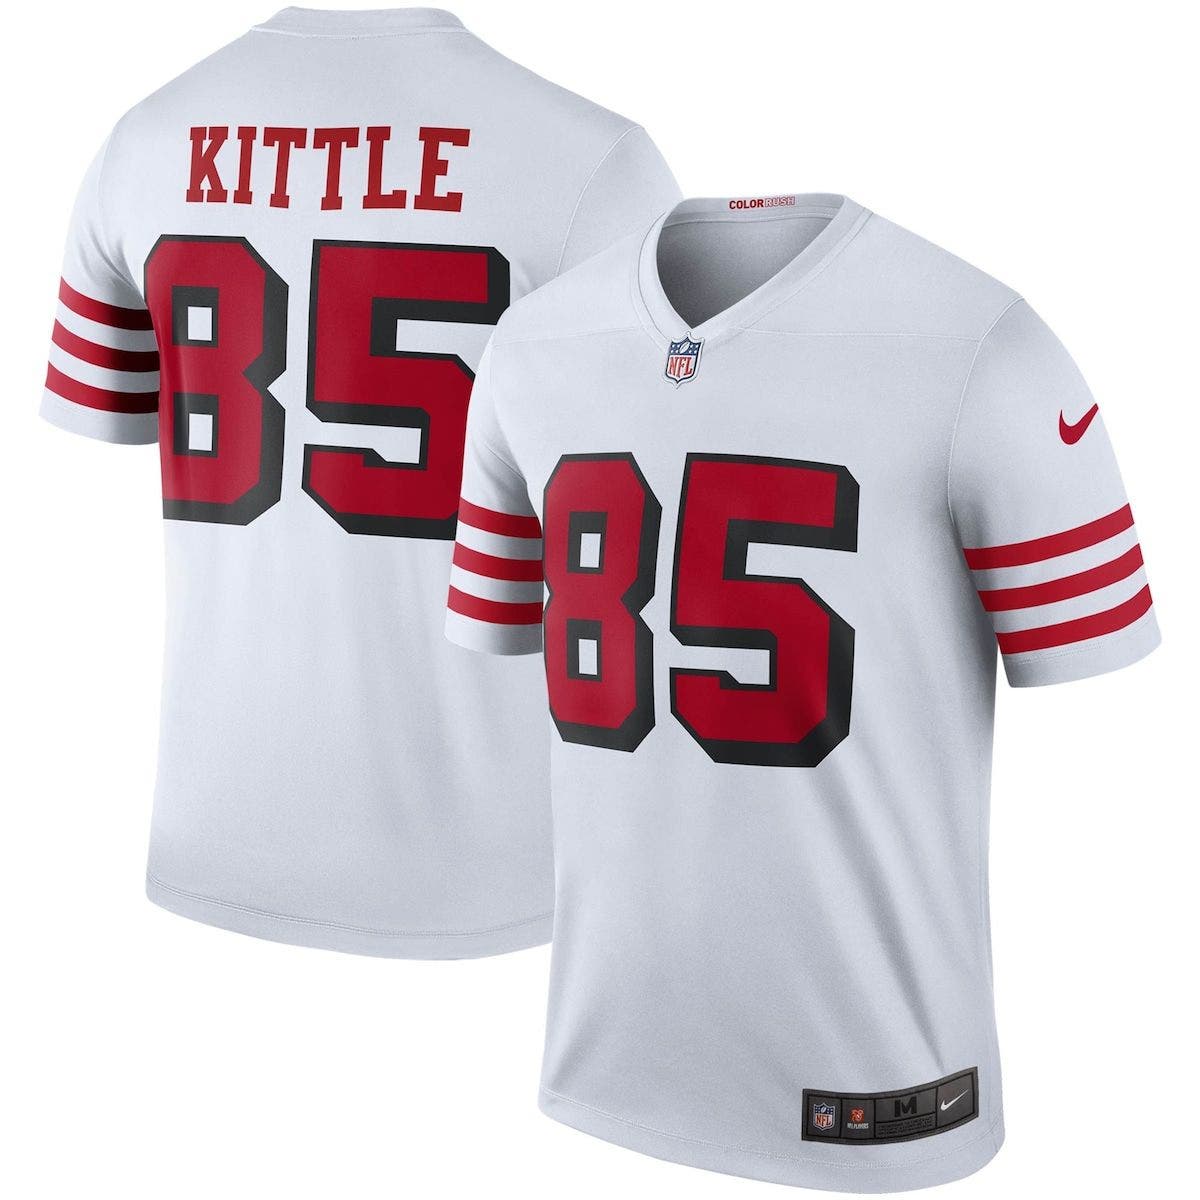 George Kittle throwback jersey